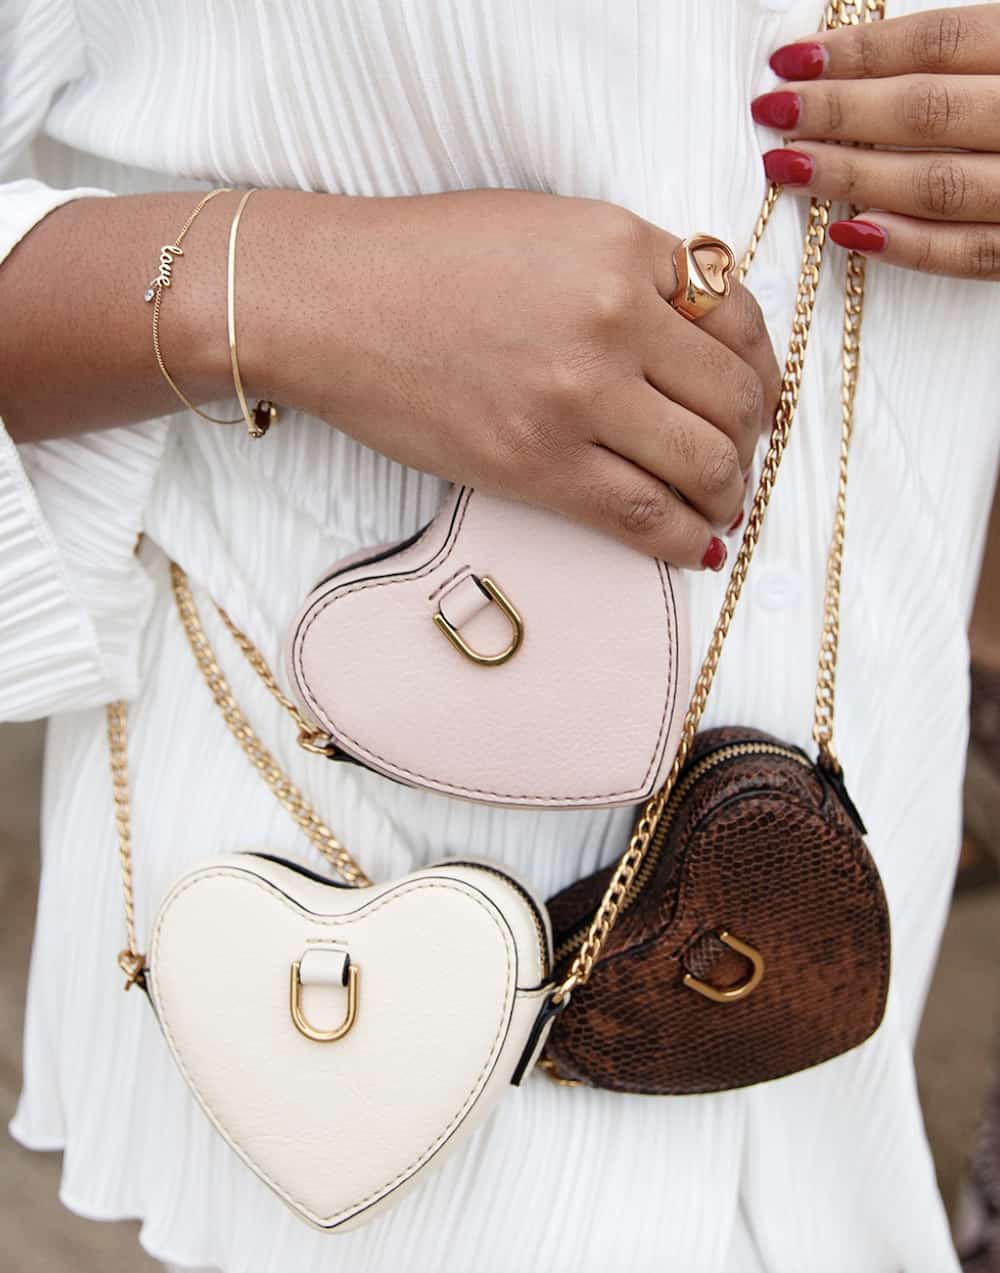 A closeup shot of a woman wearing three Fossil handbags - all shaped like hearts with gold hardware and chain straps, one white, one pastel pink, and one a textured brown leather